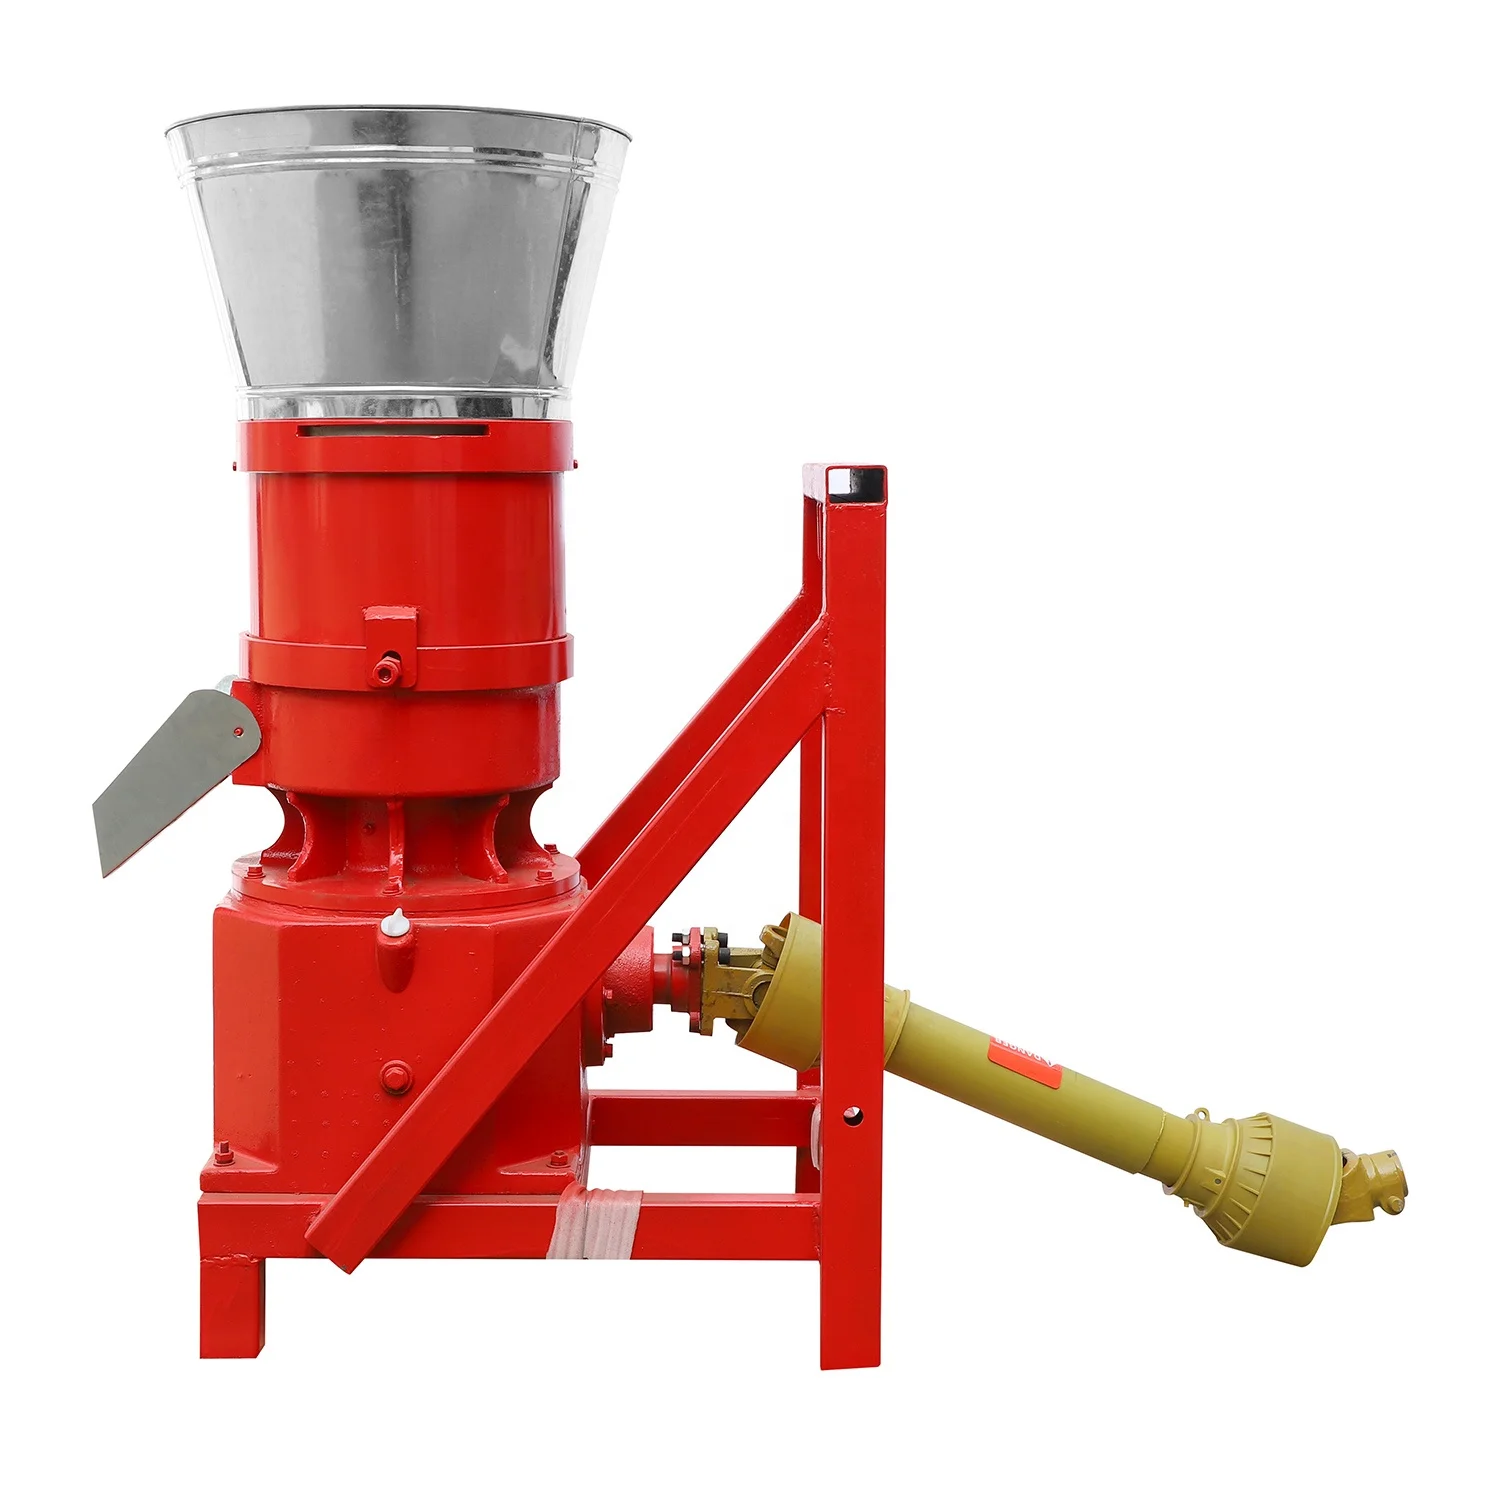 PTO Wood Pellet Mill for Farm Use